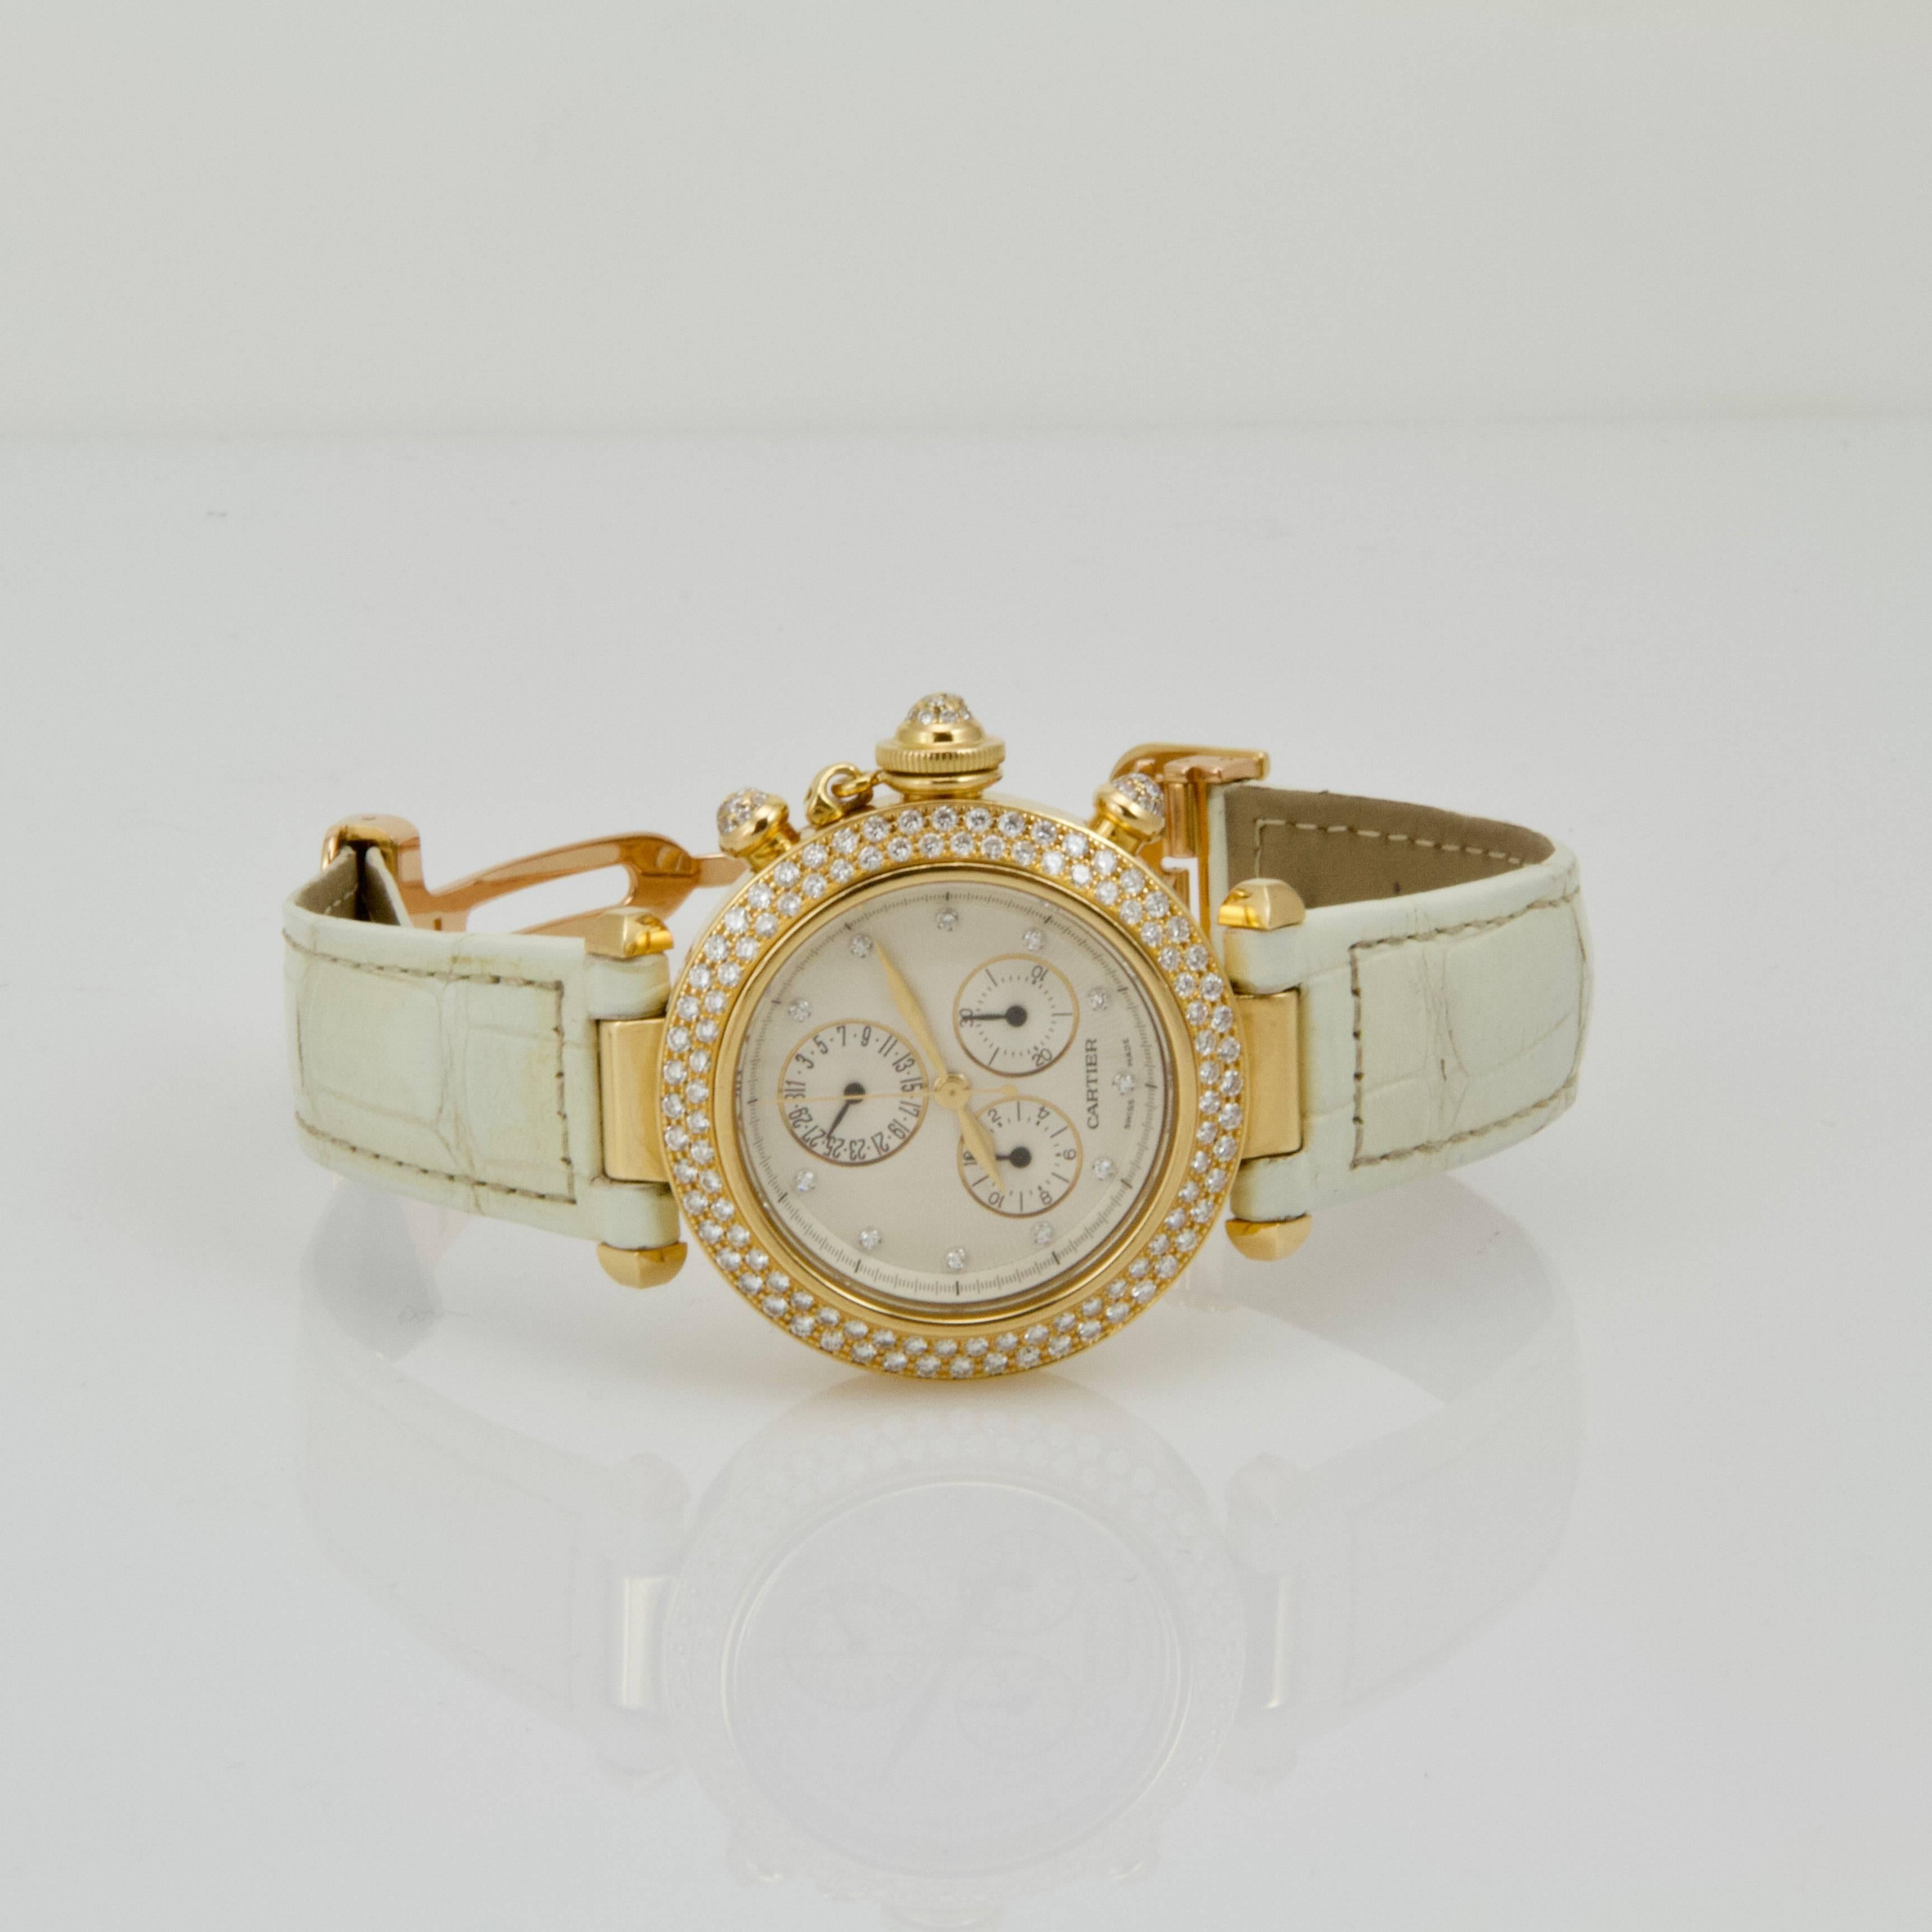 18-karat yellow gold diamond Pasha wristwatch by Cartier. 
Brand: Cartier
Style name: Pasha
Reference number: 1354/1
Case material: 18-karat yellow gold with diamonds
Dial color: White dial, gold hands
Movement: Quartz
Functions: Hours,